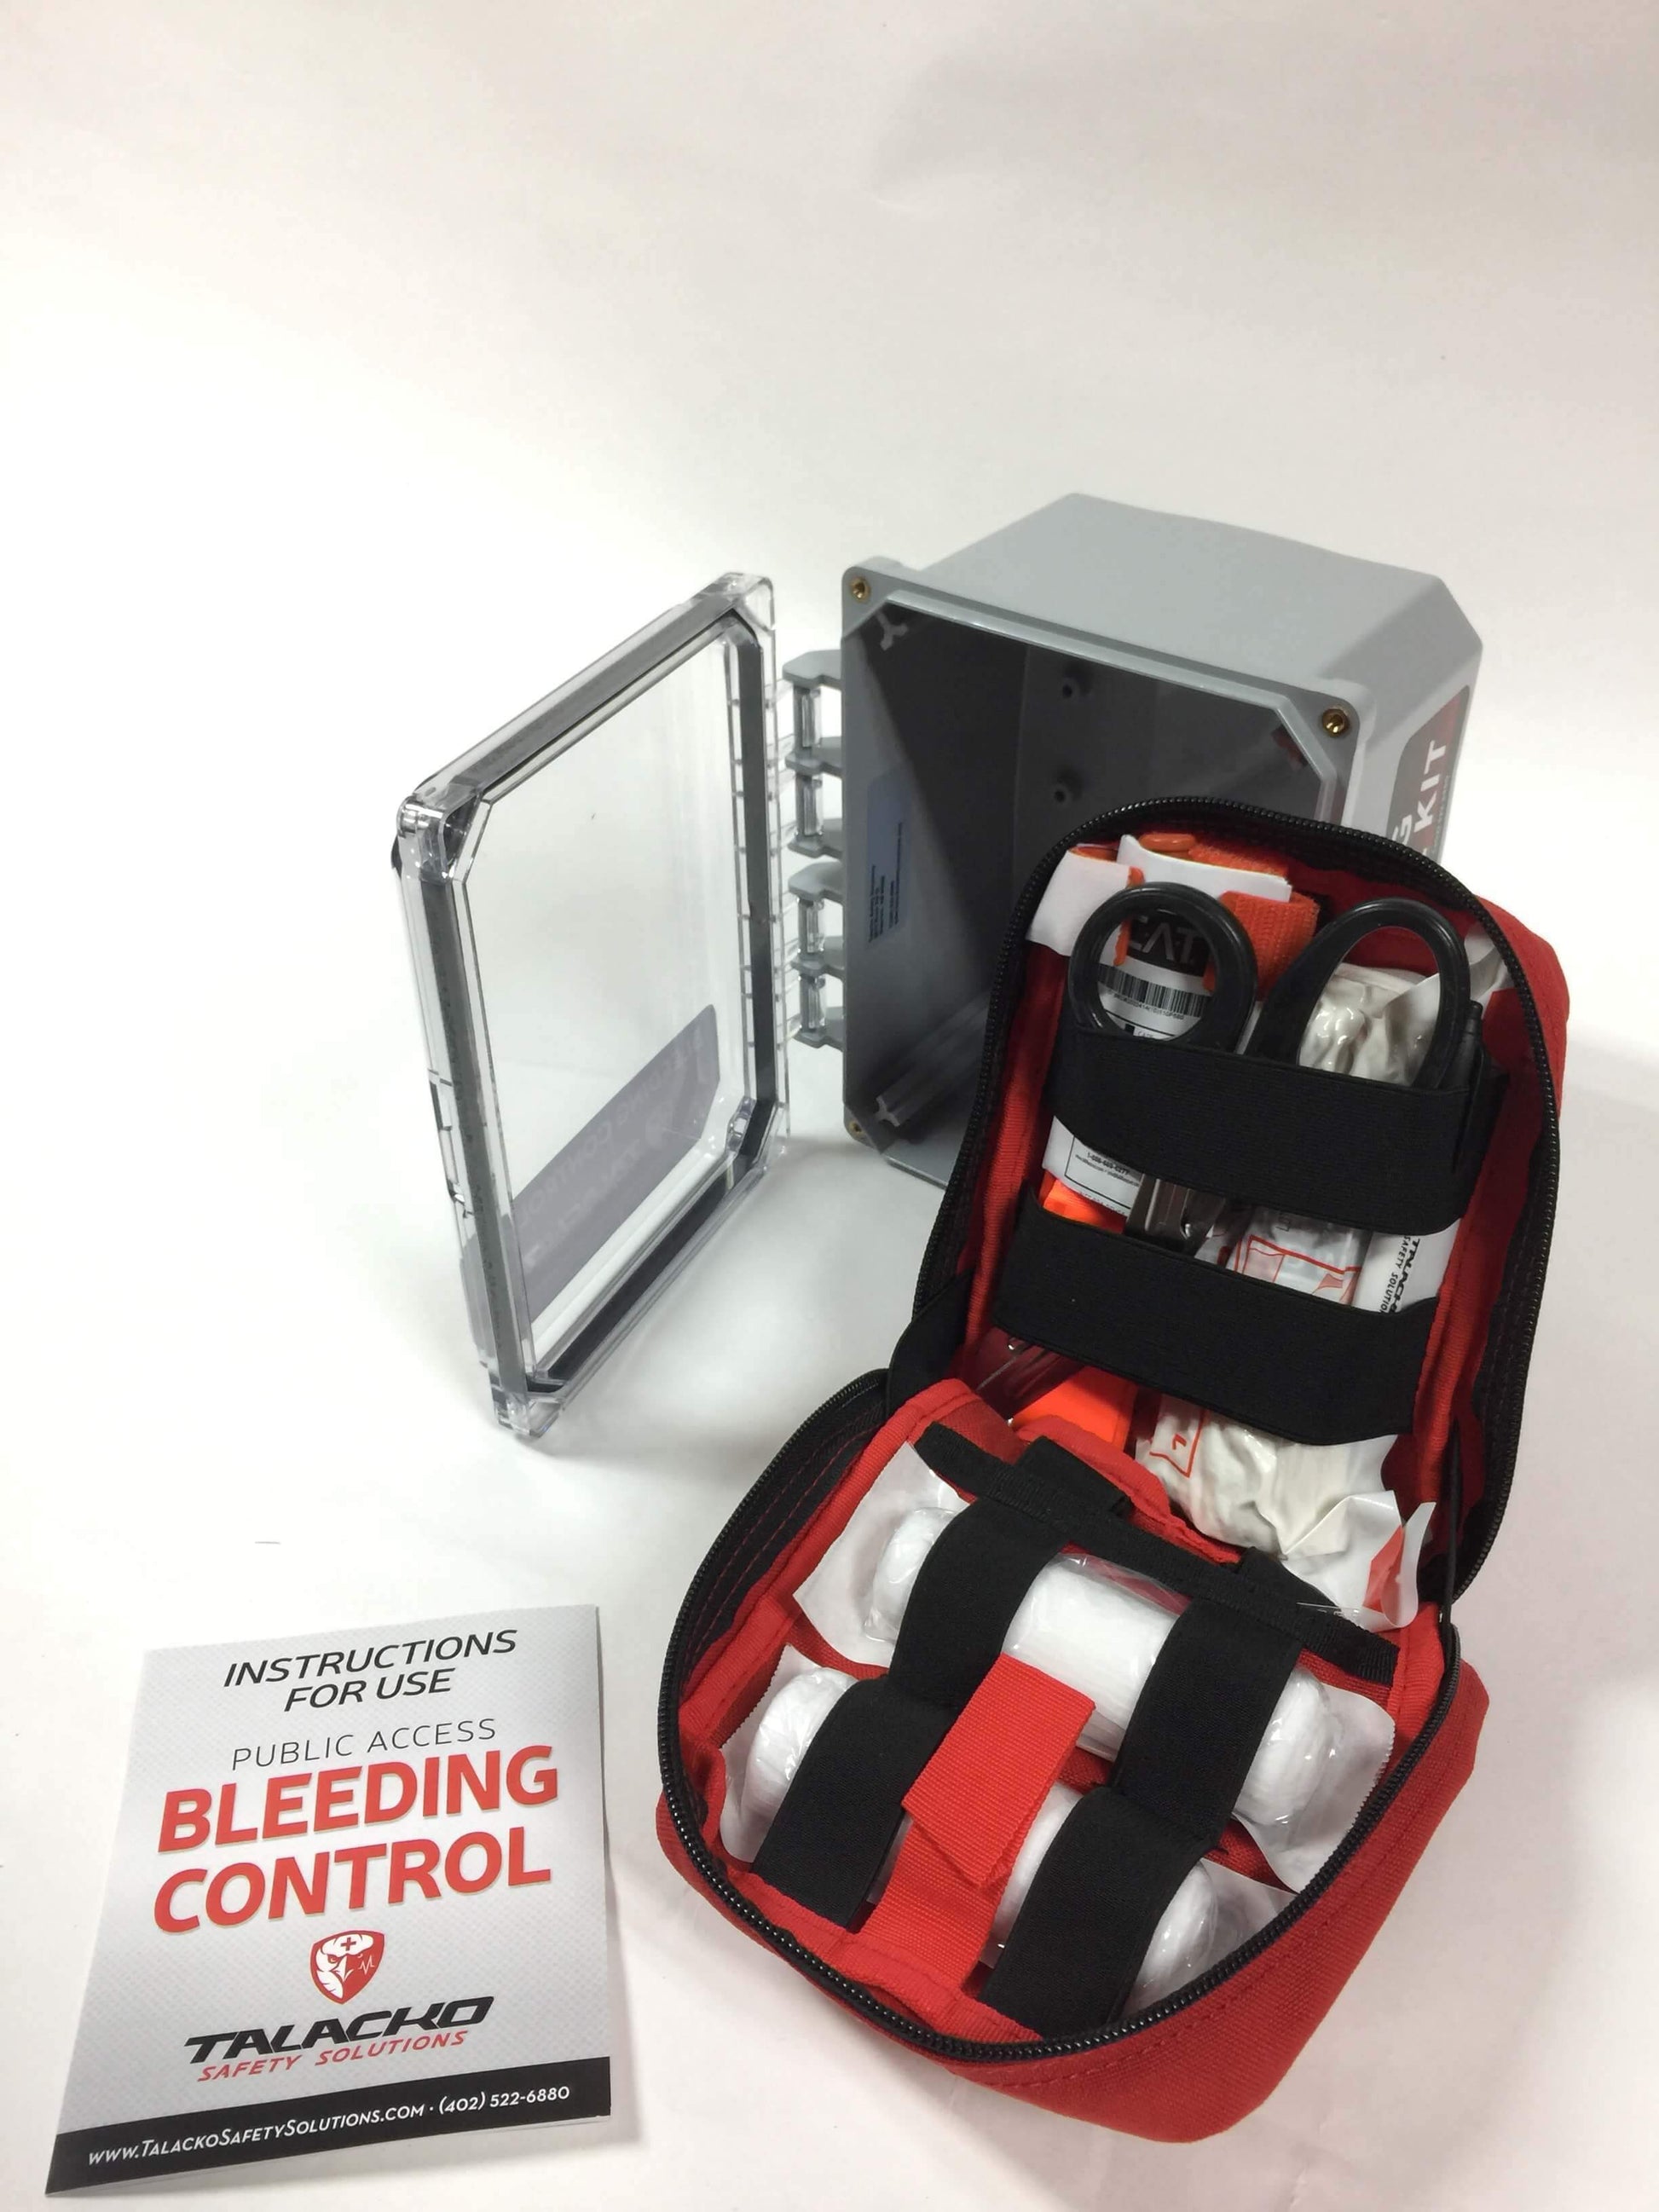 This bleeding control station is designed for job trailers, construction sites, general industry, churches, schools and businesses.